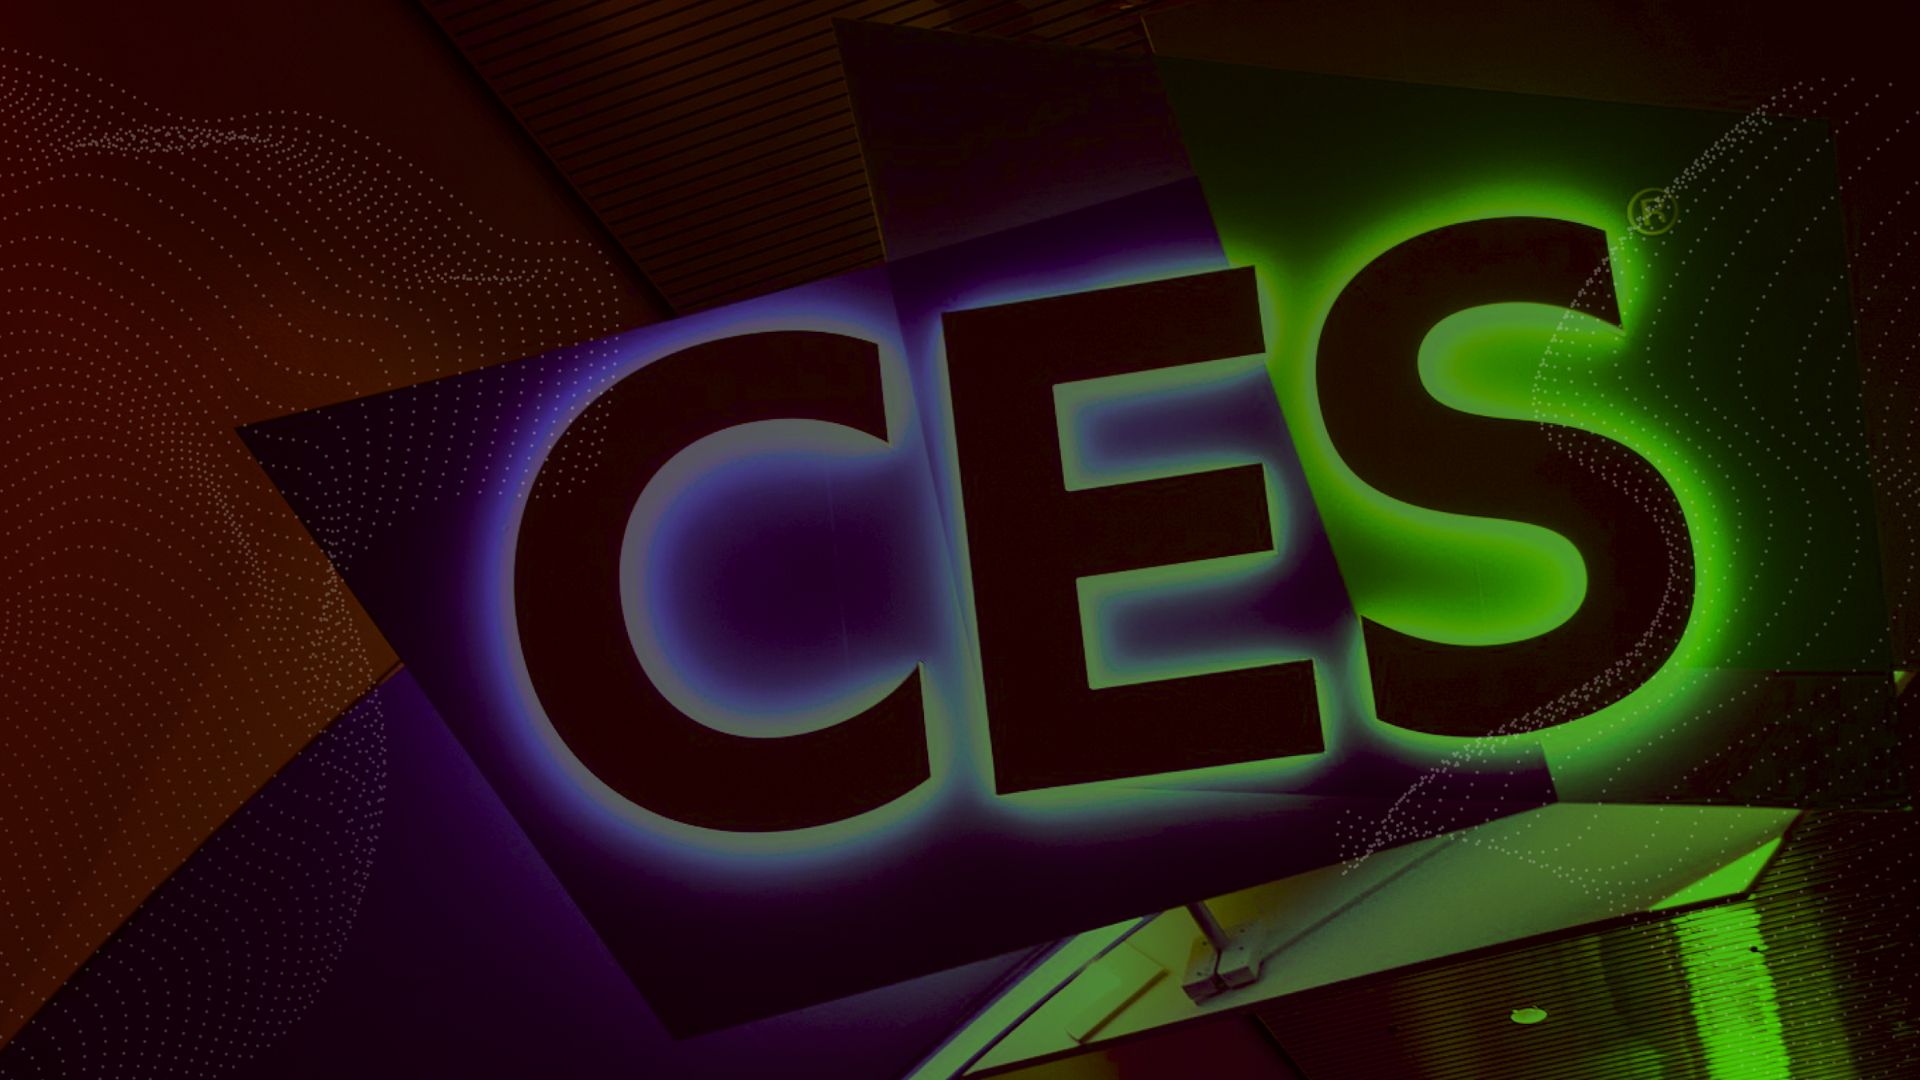 CES 2023 events spotlight the metaverse, luxury and Web3 fashion